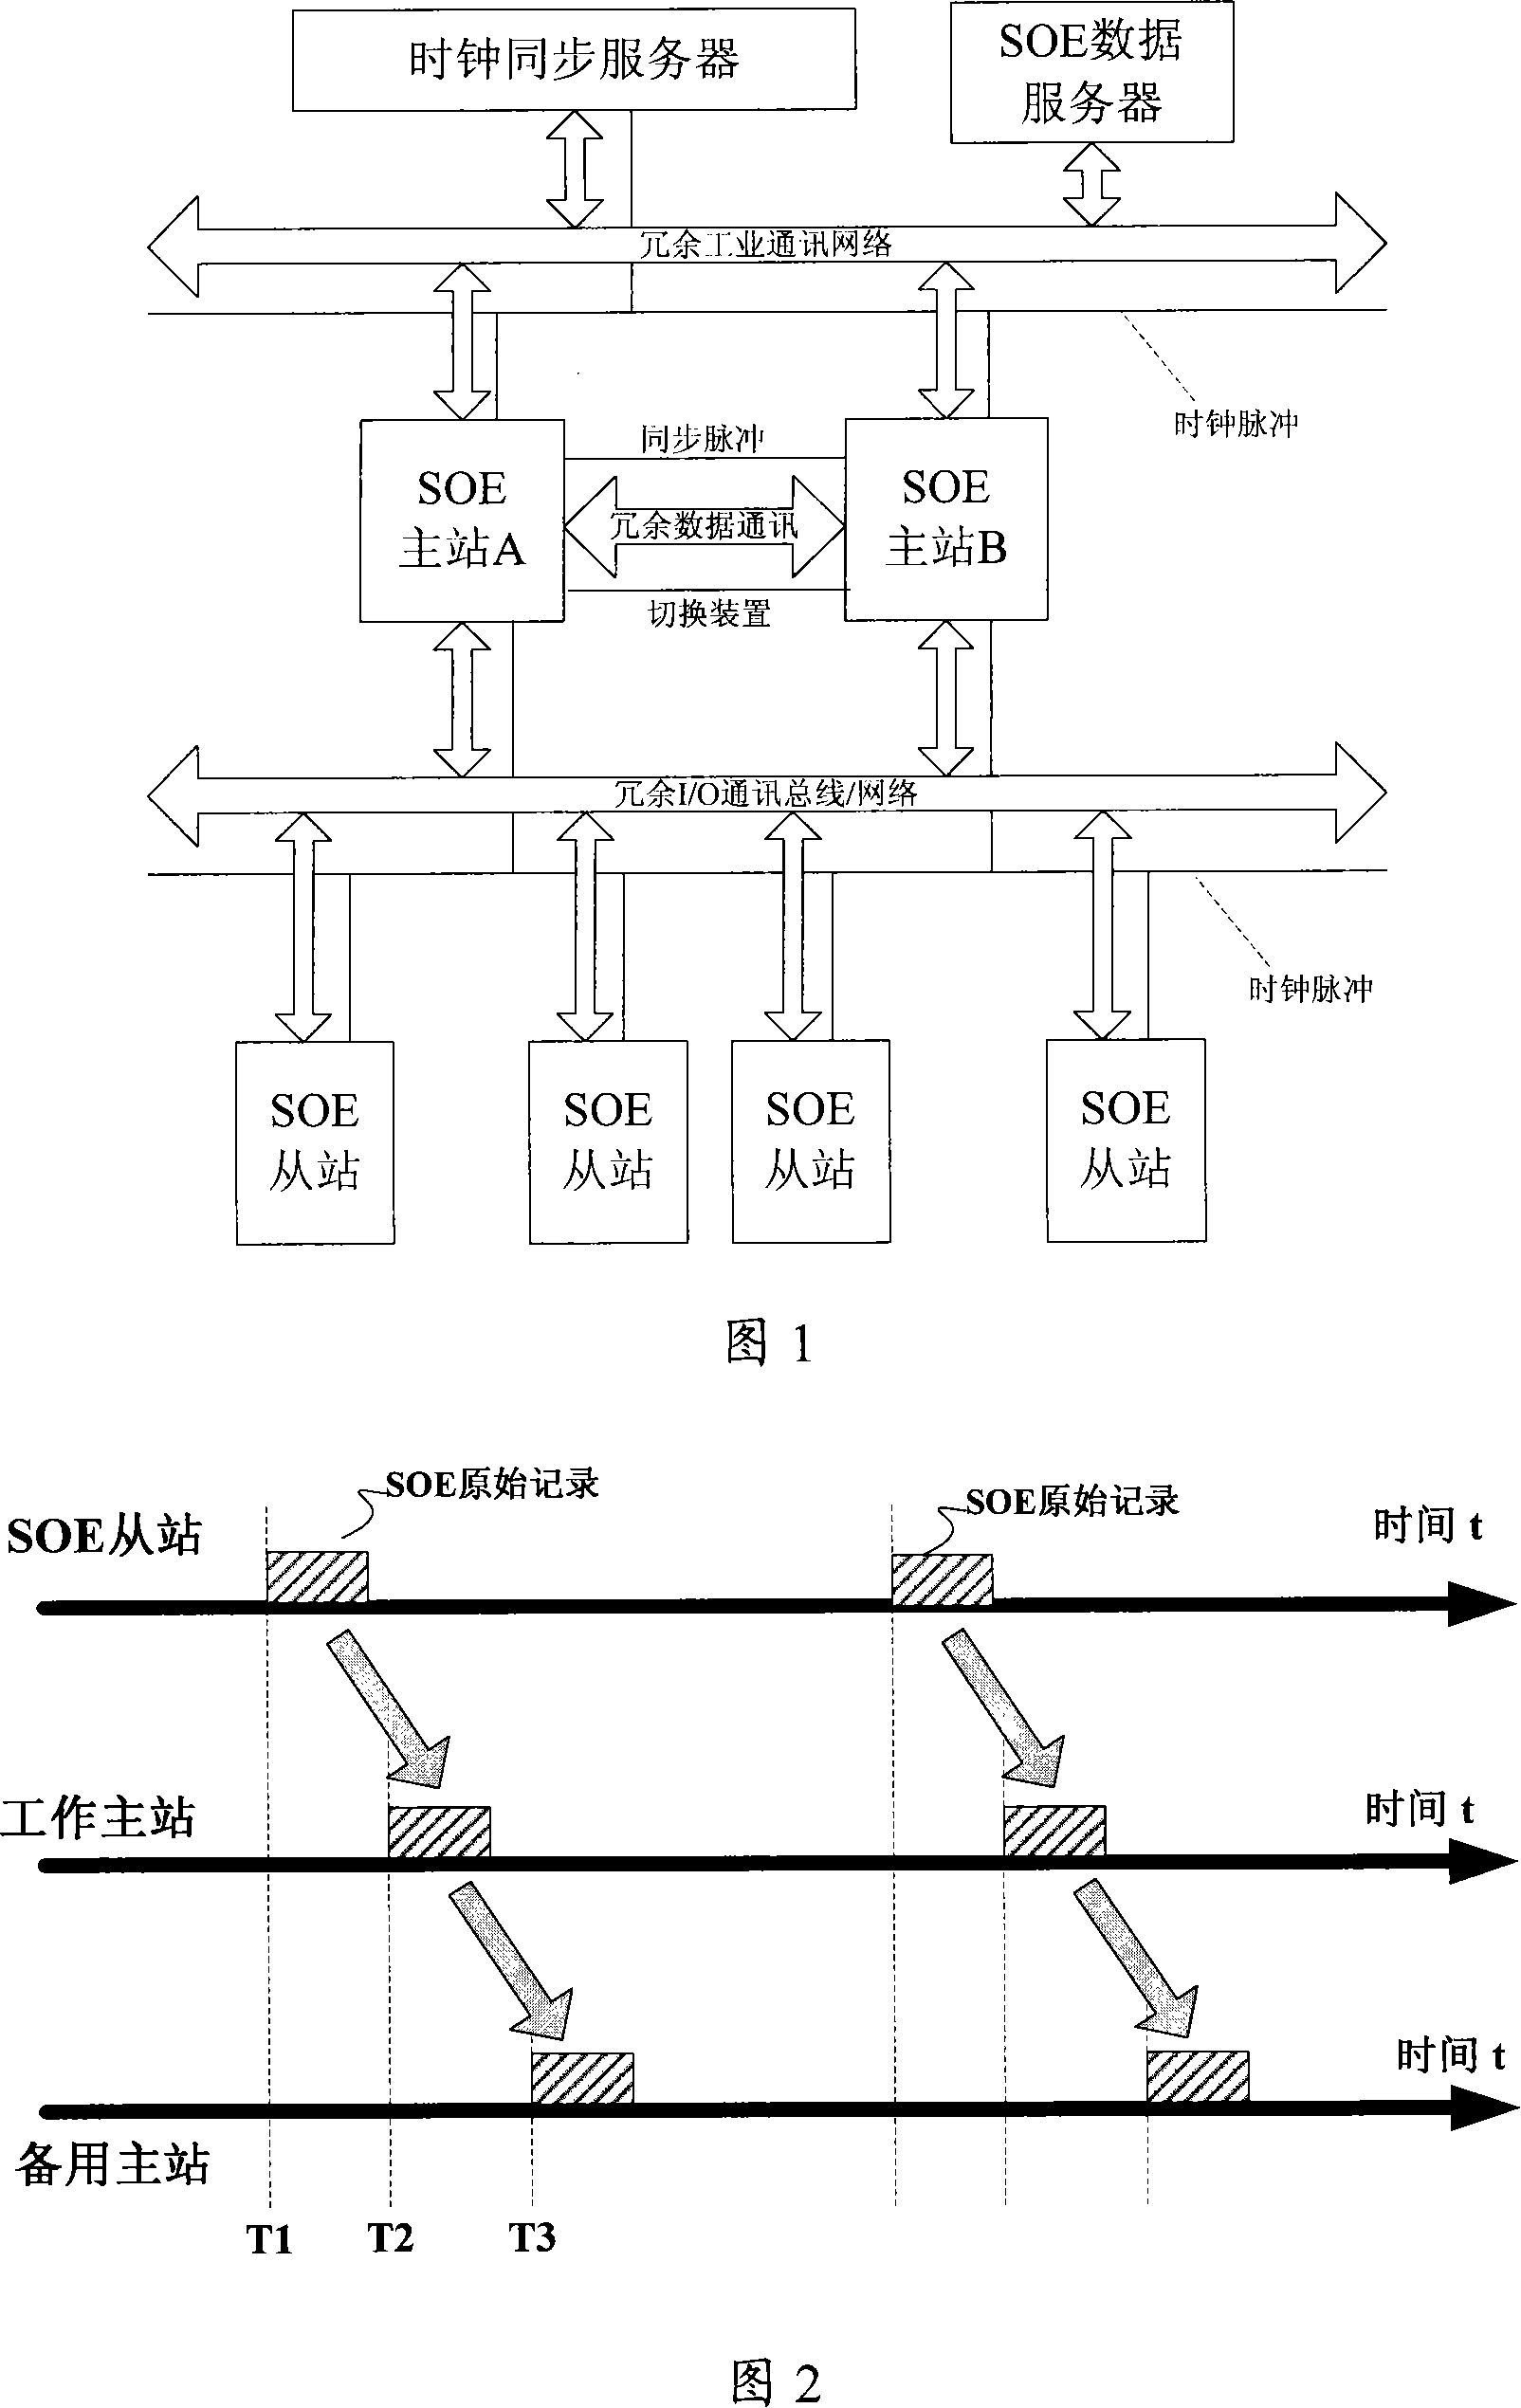 Method for implementing working main station and standby main station synchronous recording